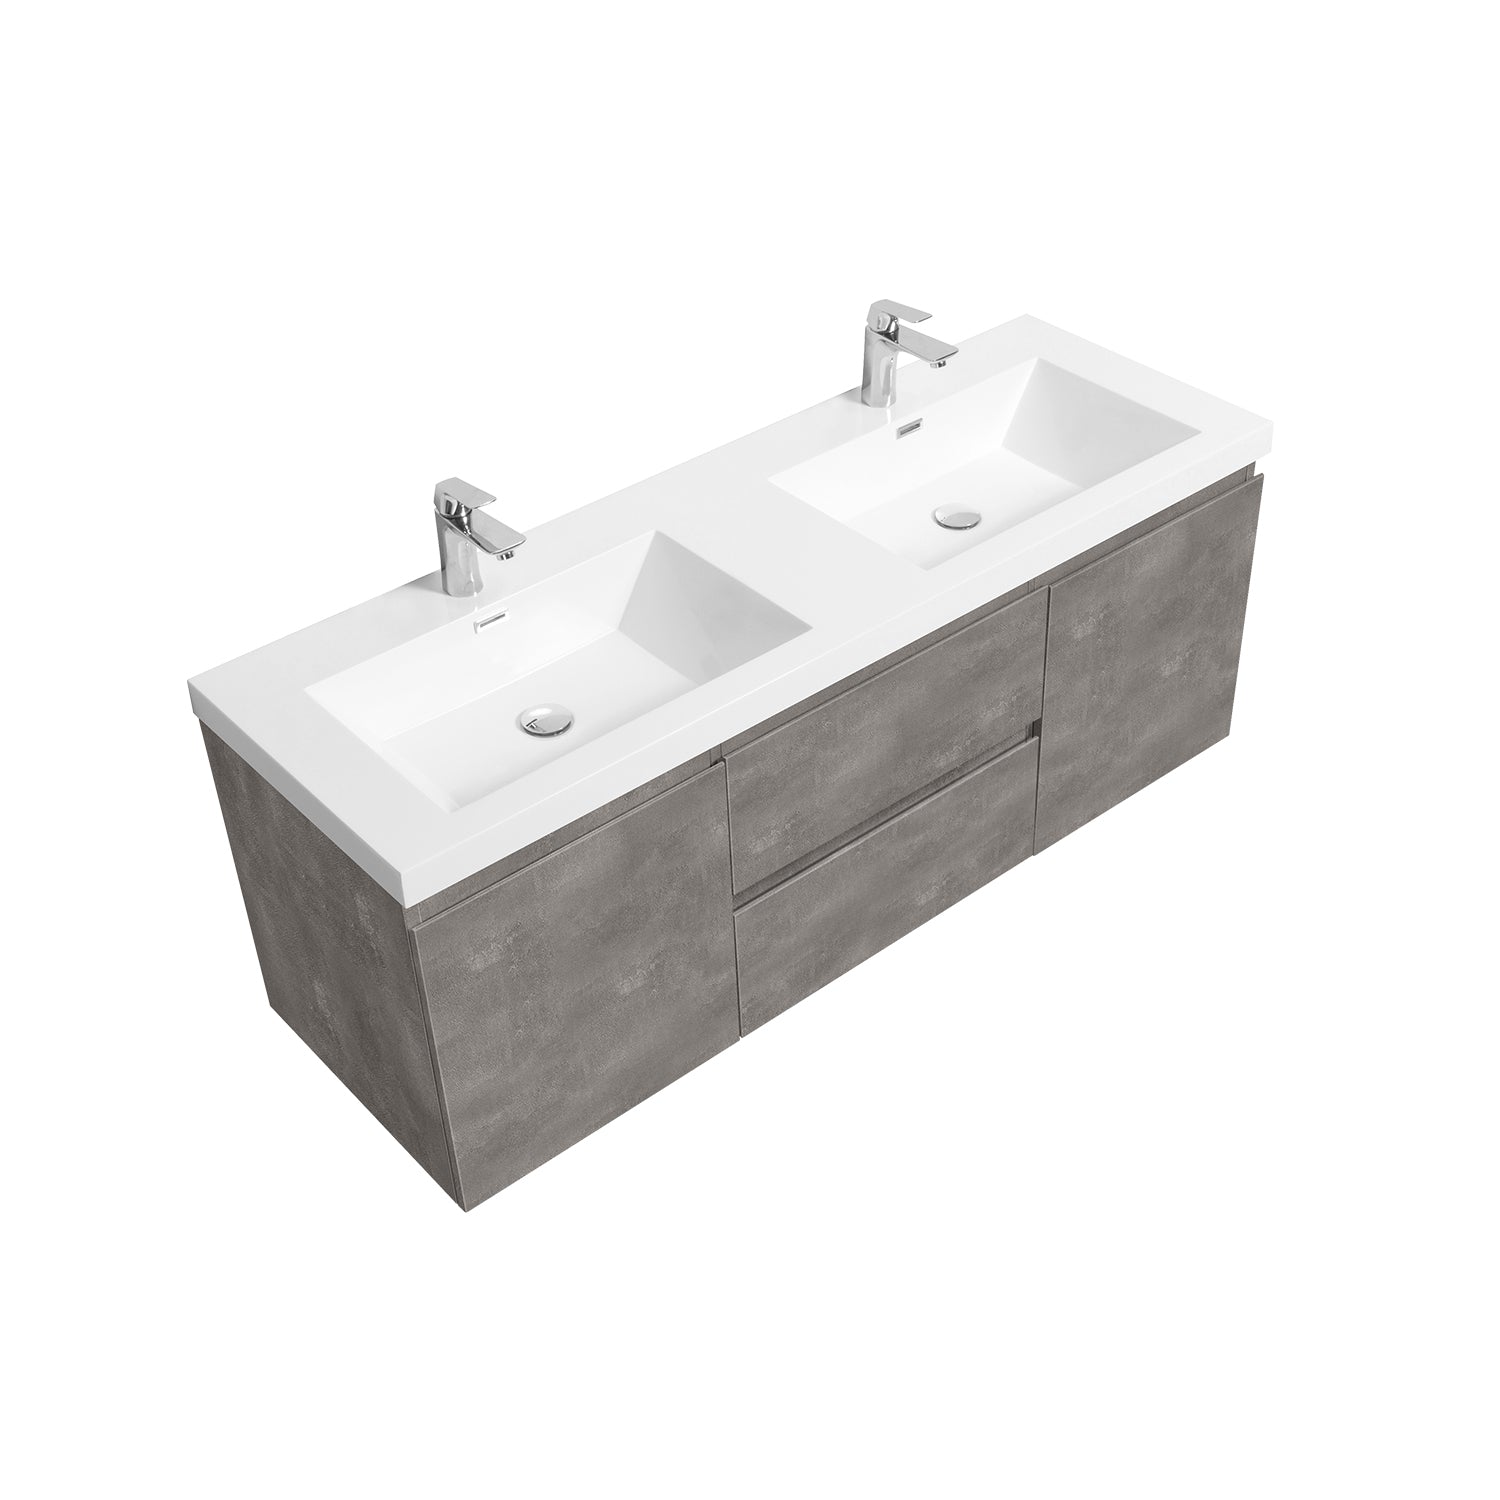 Sinber 60" Wall Mounted Double Rectangular Sink Bathroom Vanity Cabinet with White Acrylic Countertop 2 Doors and 2 Drawers, Compact and Elegant with Sleek Design for Modern Bathrooms